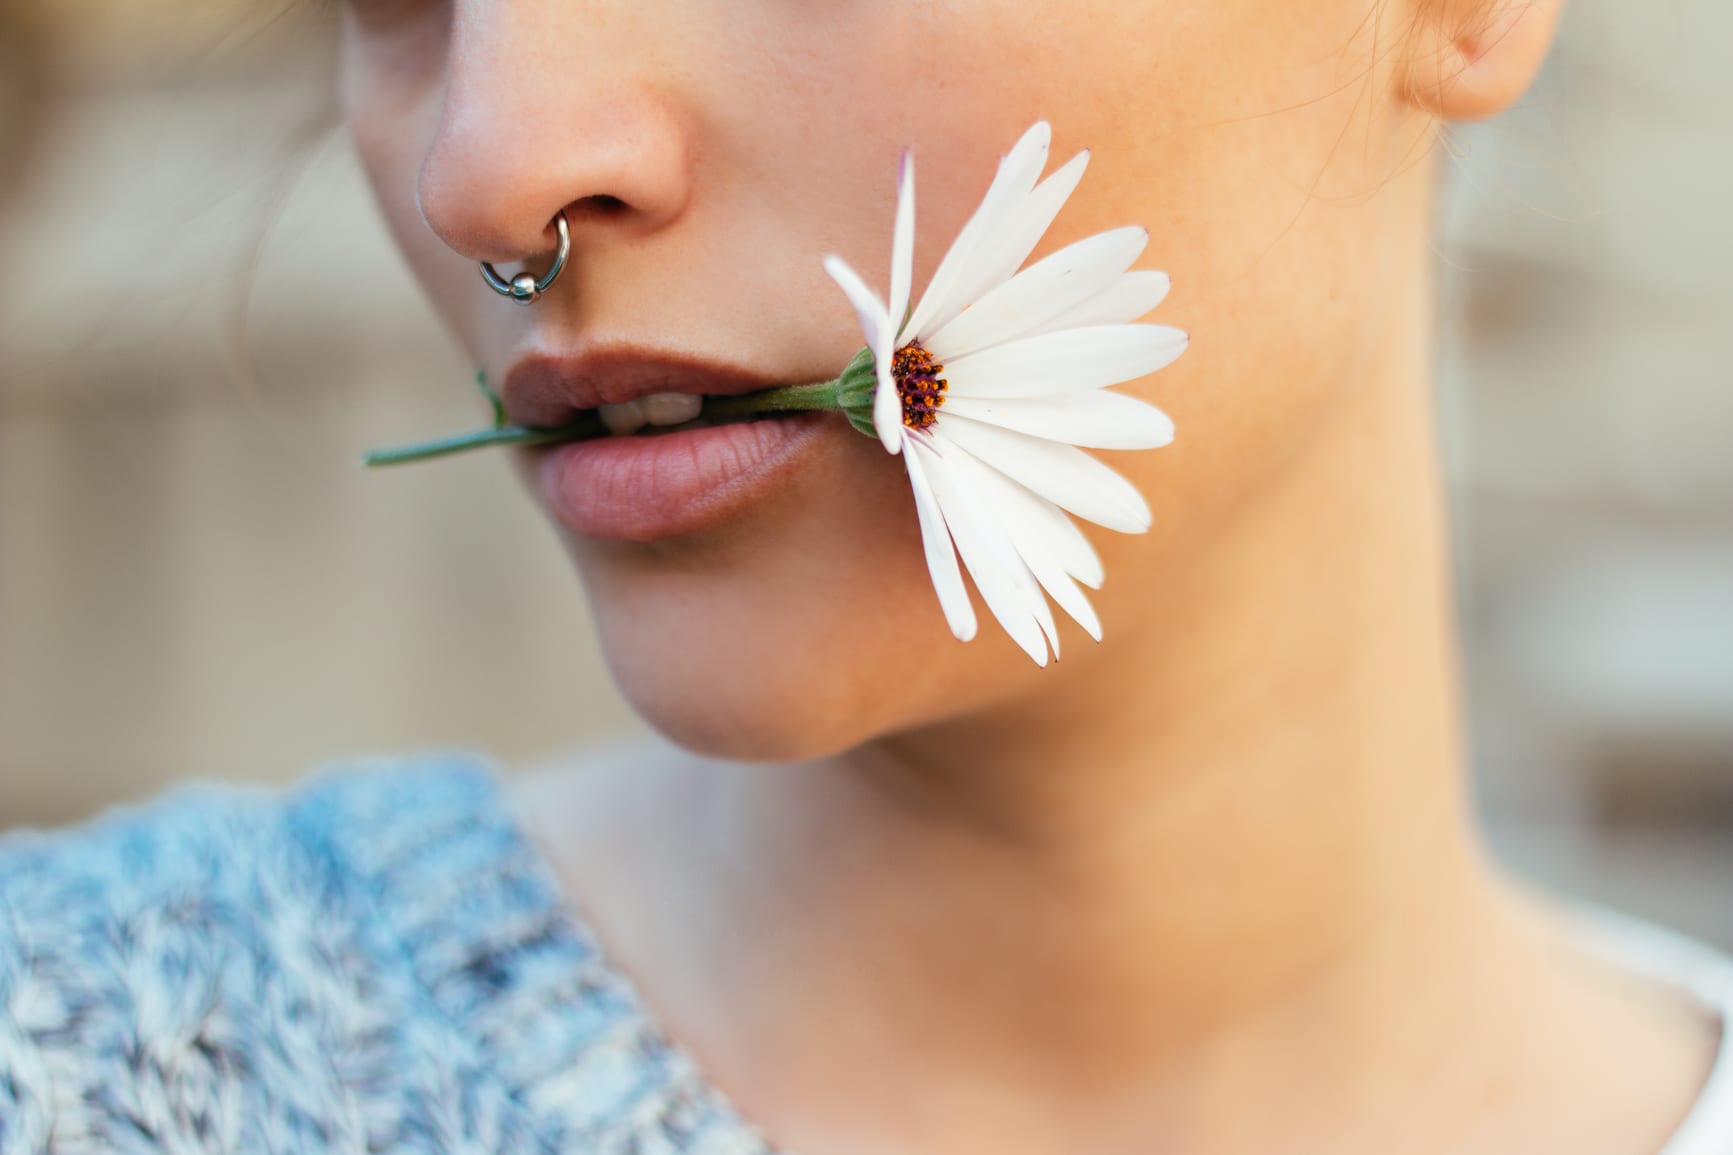 Woman with pierced septum and a daisy in her mouth